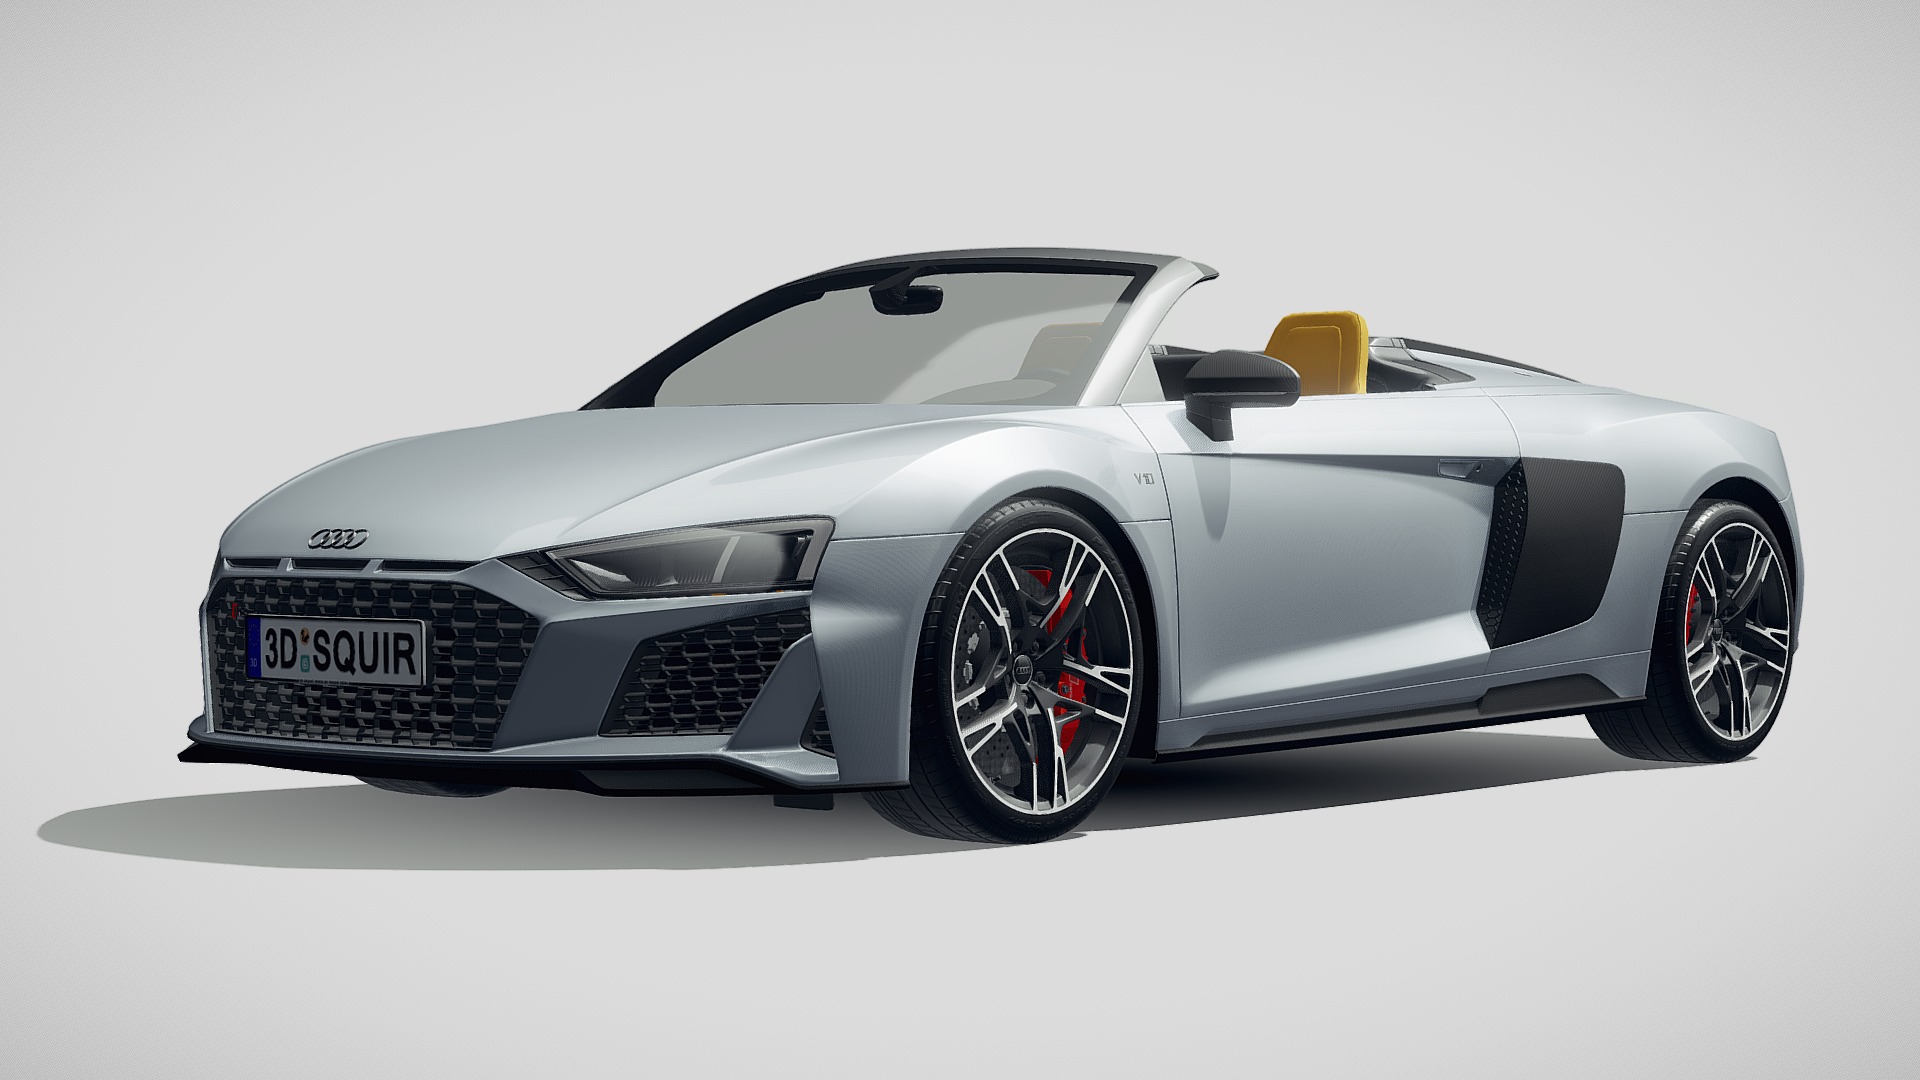 3D model Audi R8 Spyder 2019 - This is a 3D model of the Audi R8 Spyder 2019. The 3D model is about a silver sports car.